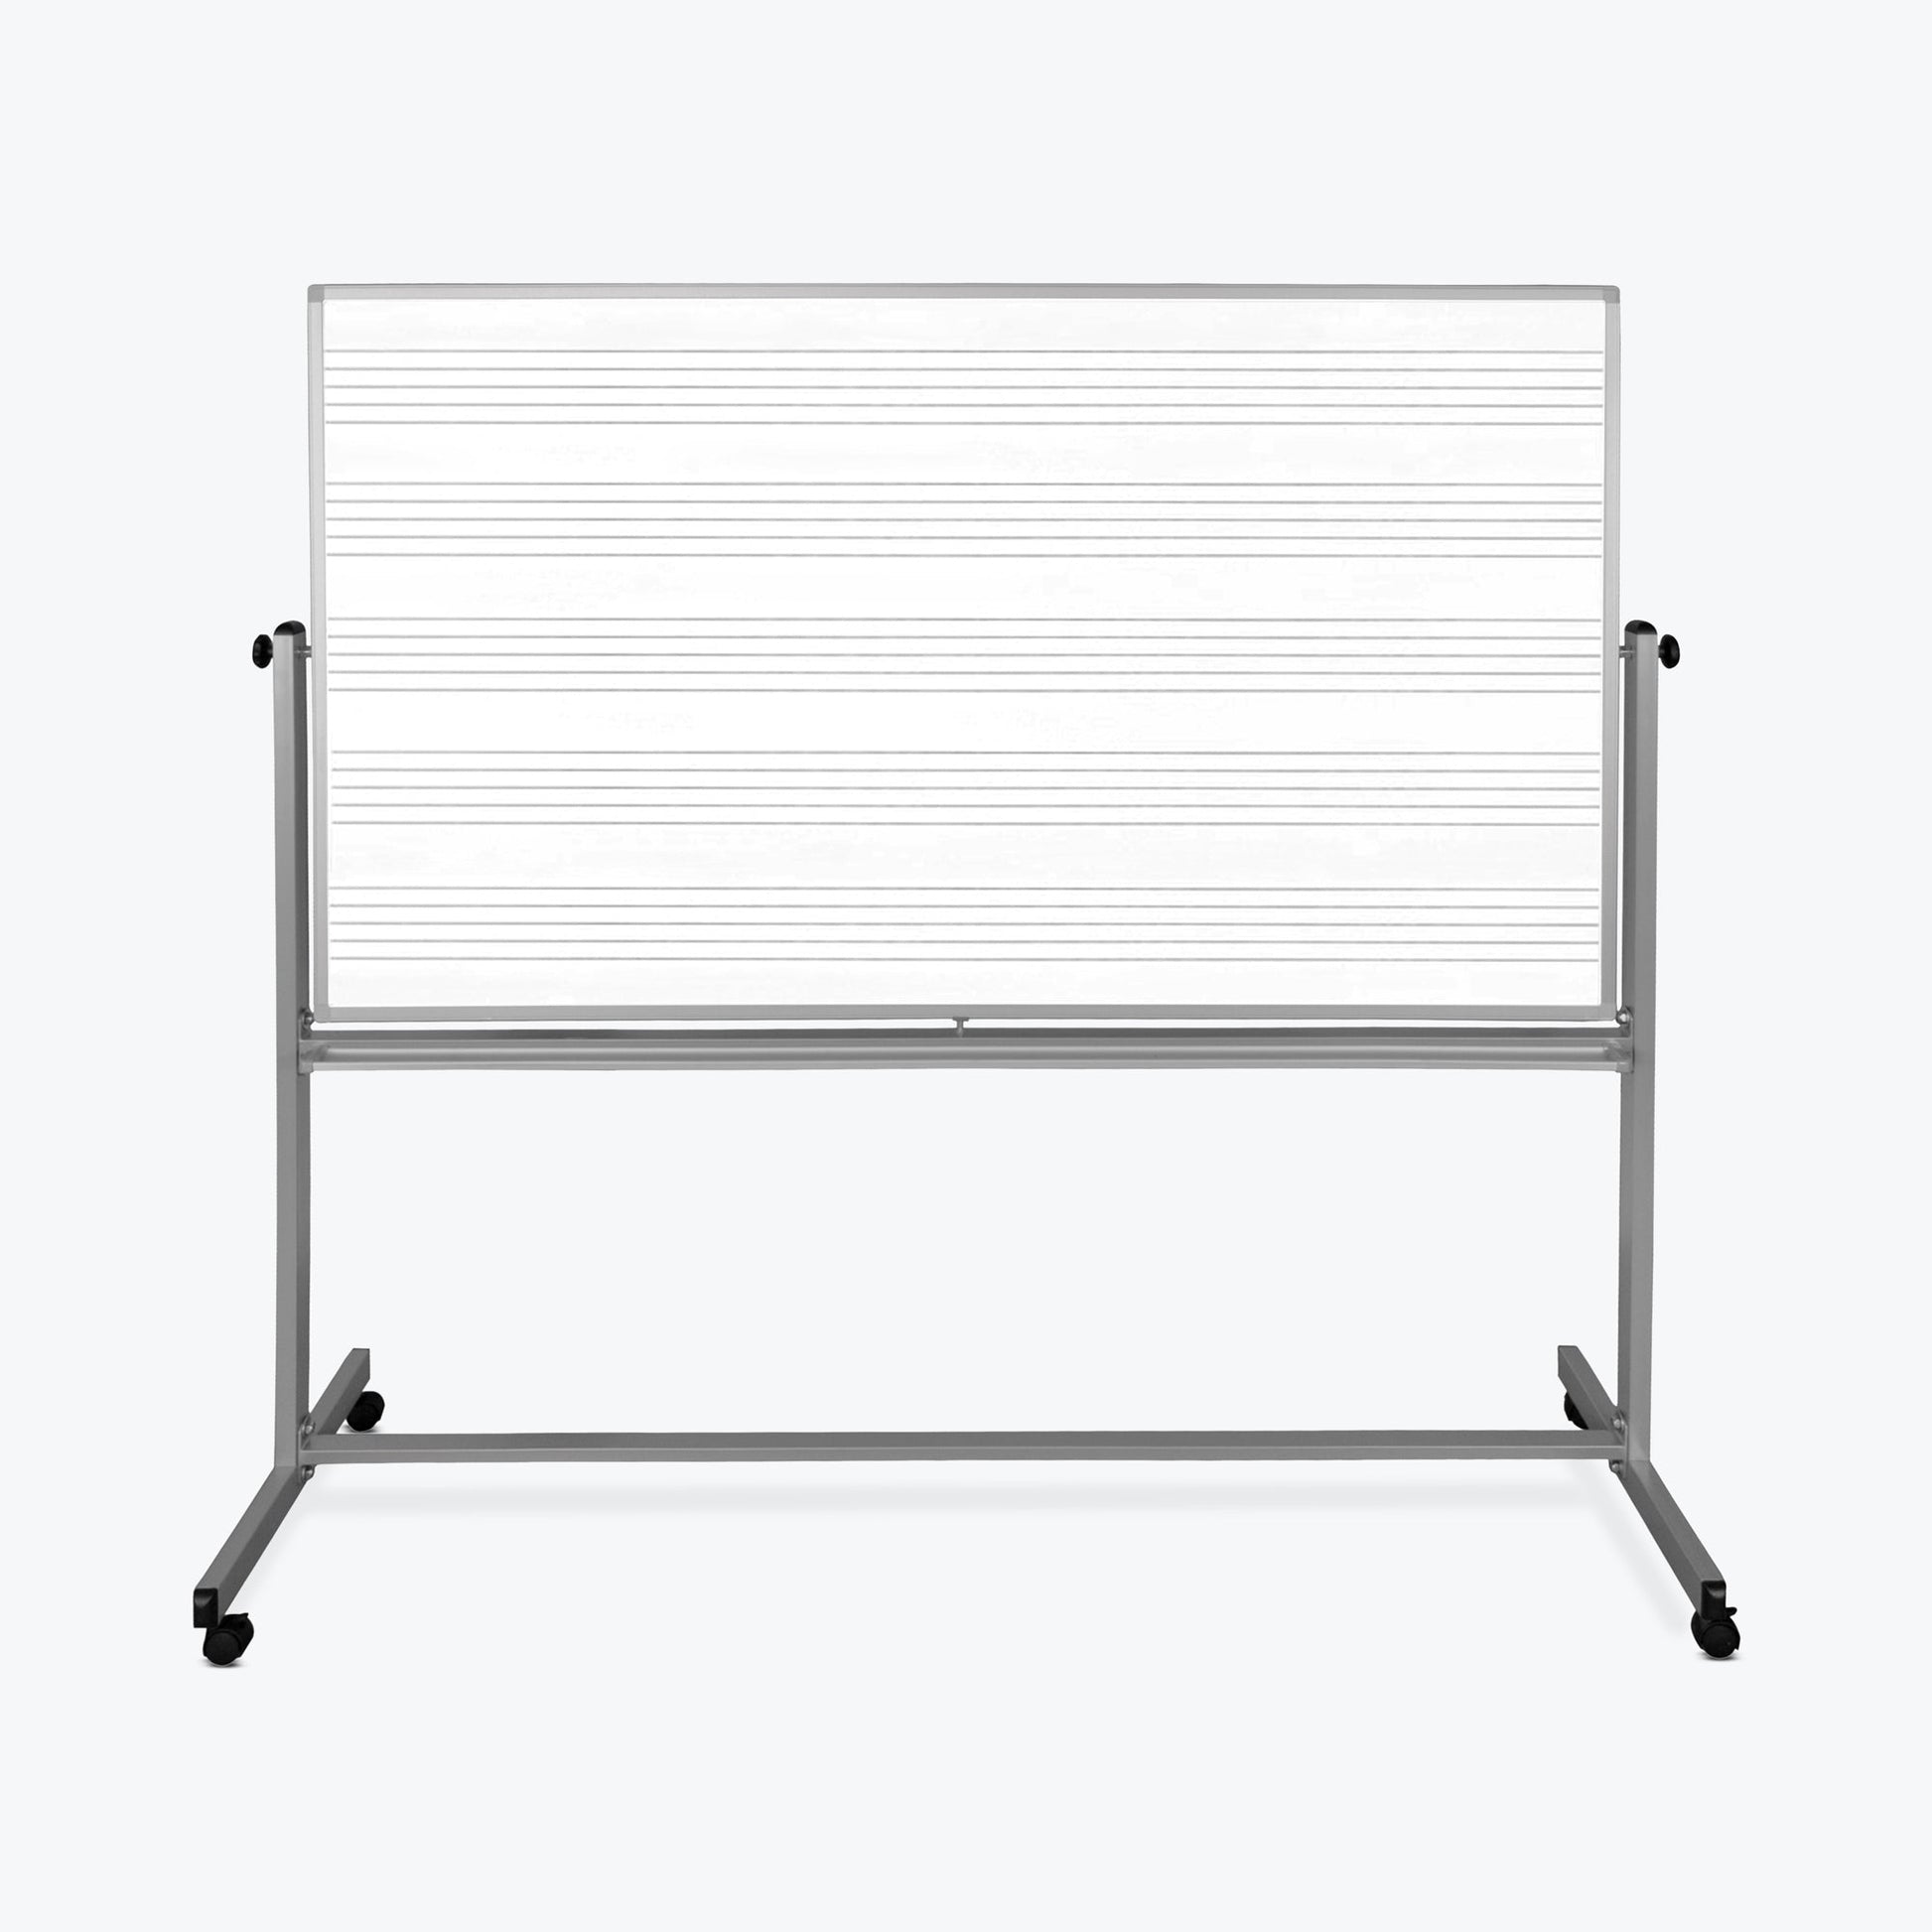 72"W x 48"H Mobile Whiteboard - Double-sided Music Whiteboard Magnetic dry erase markerboard - Luxor MB7248MM - SchoolOutlet